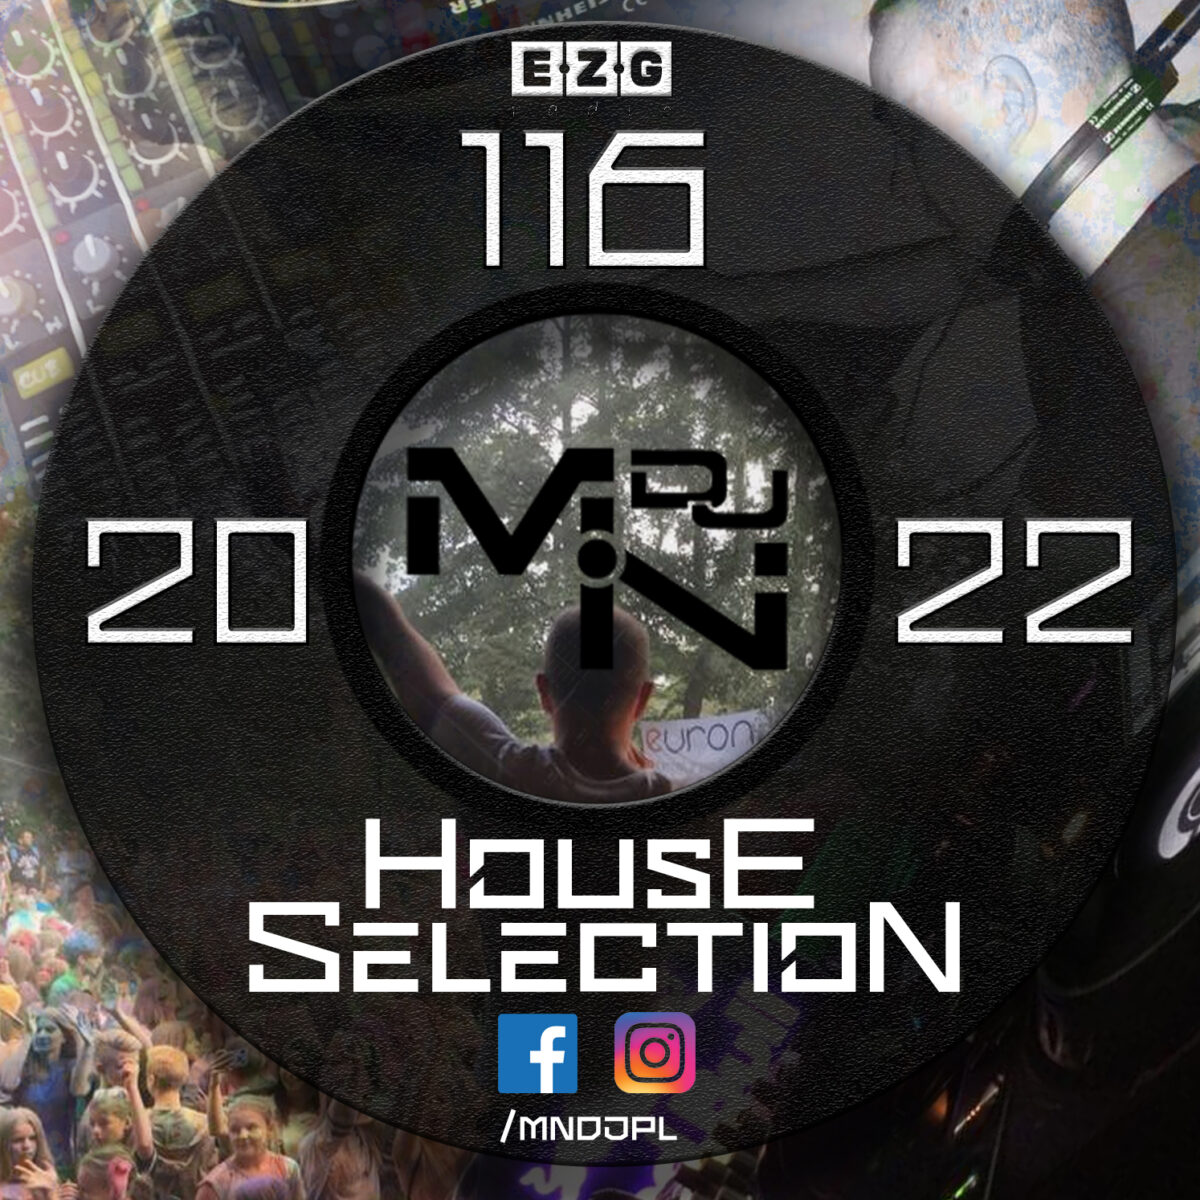 House Selection #116